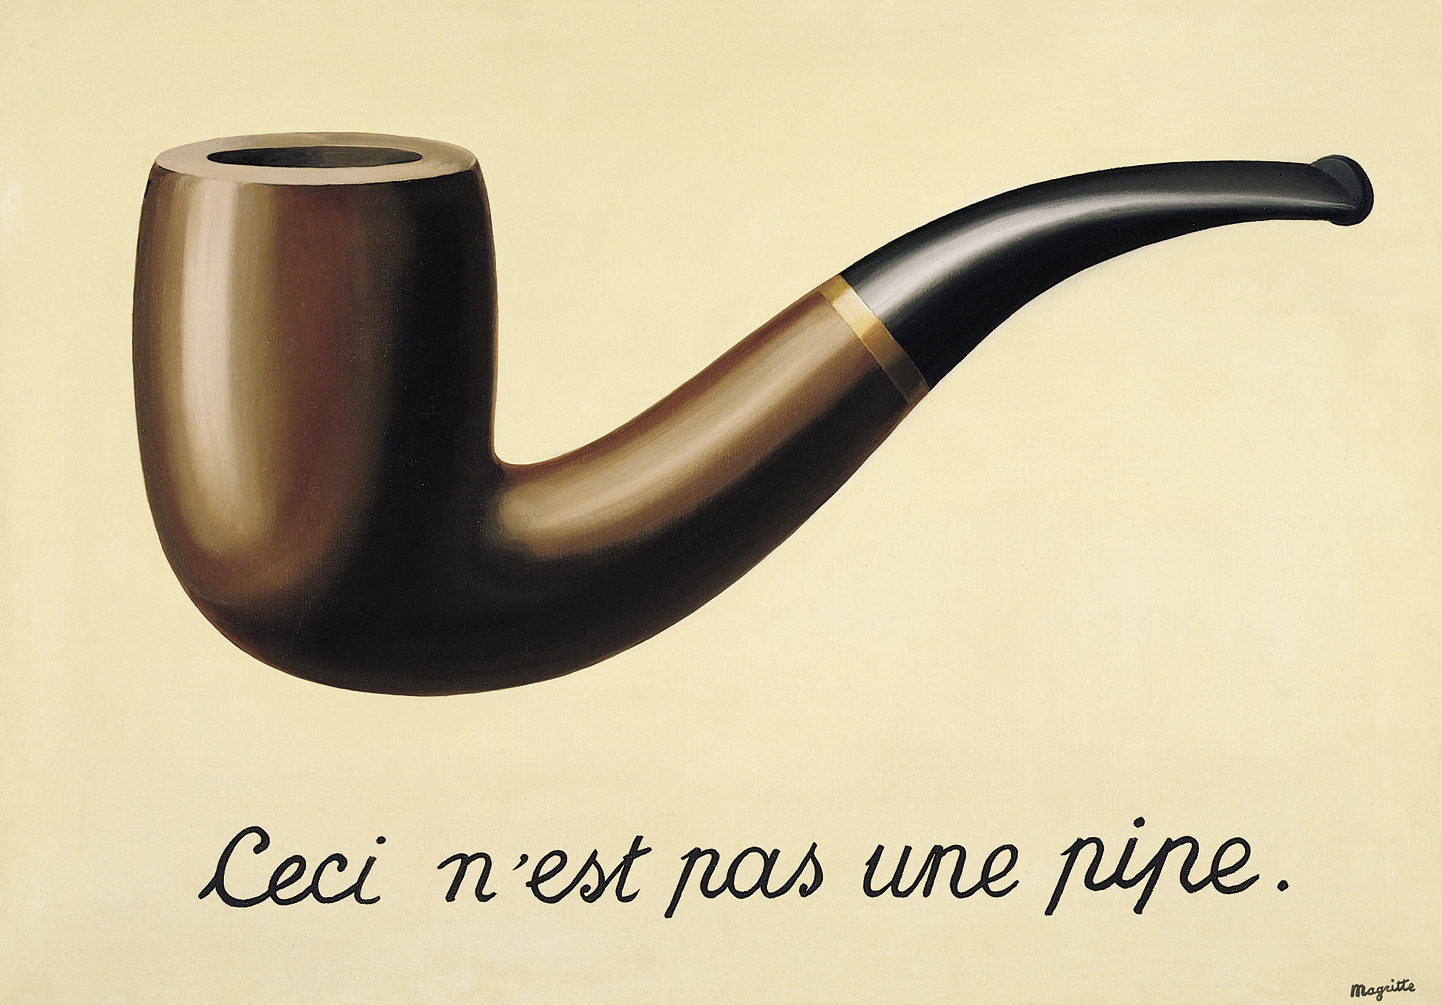 Rene Magritte, Ceci N'est Pas Une Pipe, 1928-1929.  Oil on canvas. Los Angeles County Museum of Art